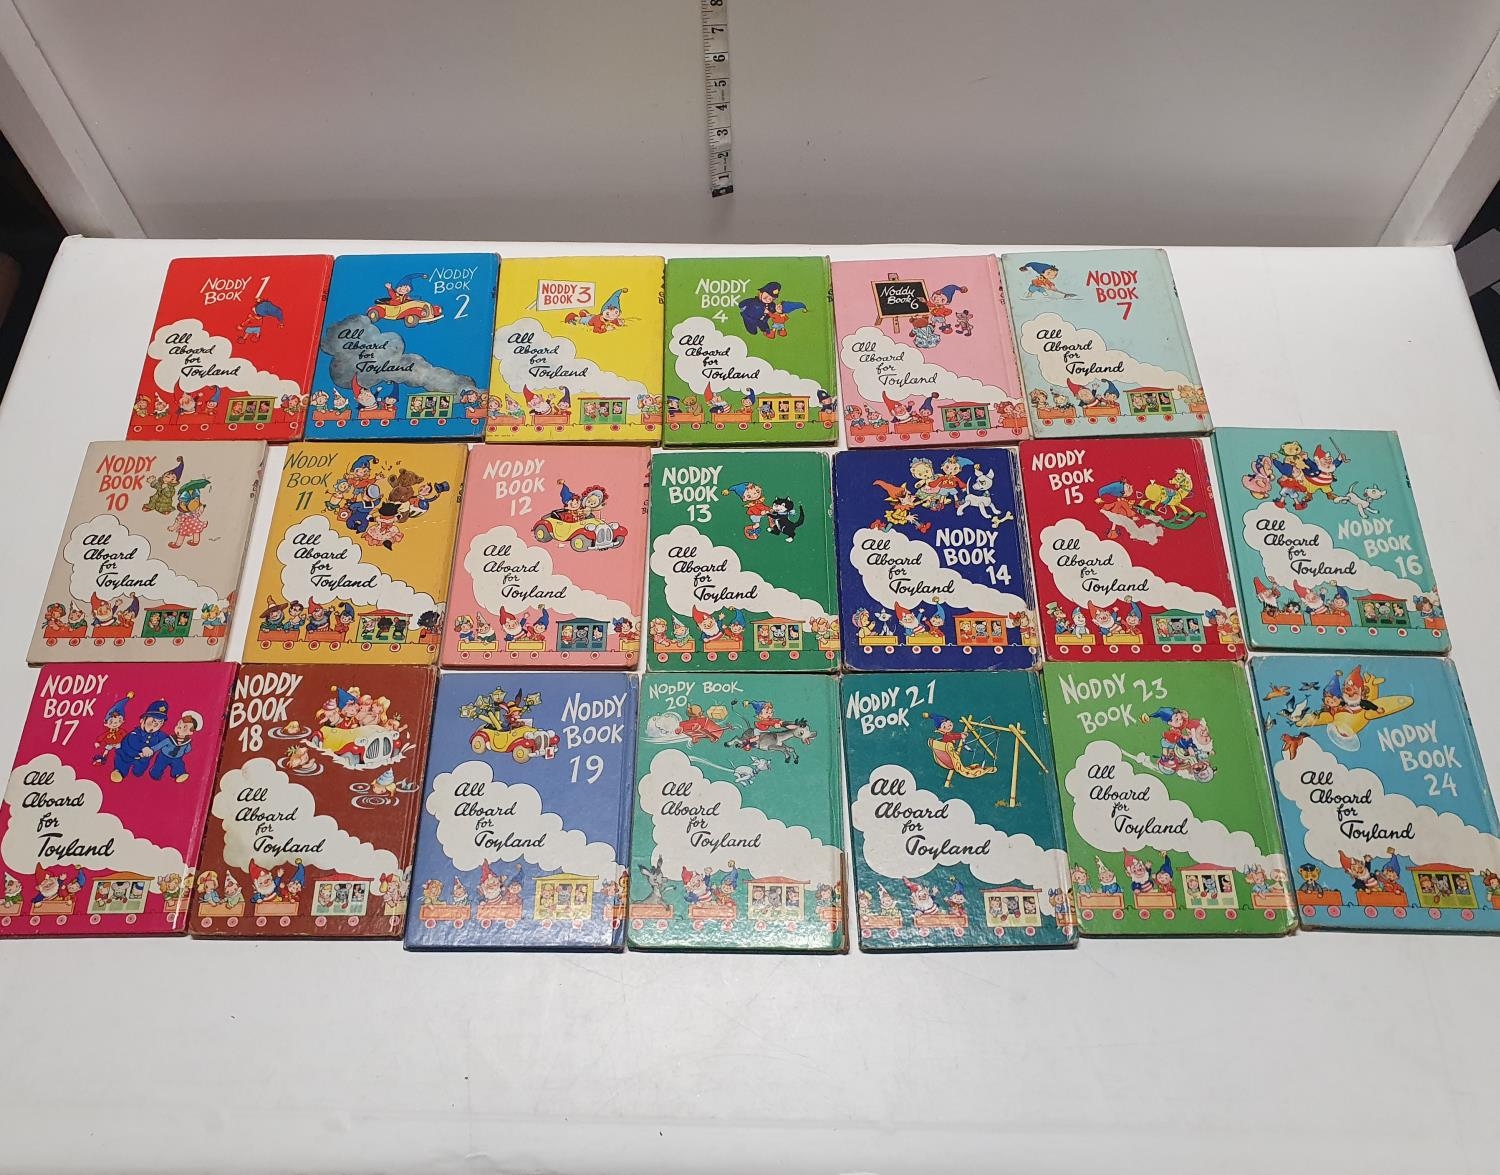 A collection of vintage Noddy books. Shipping unavailable